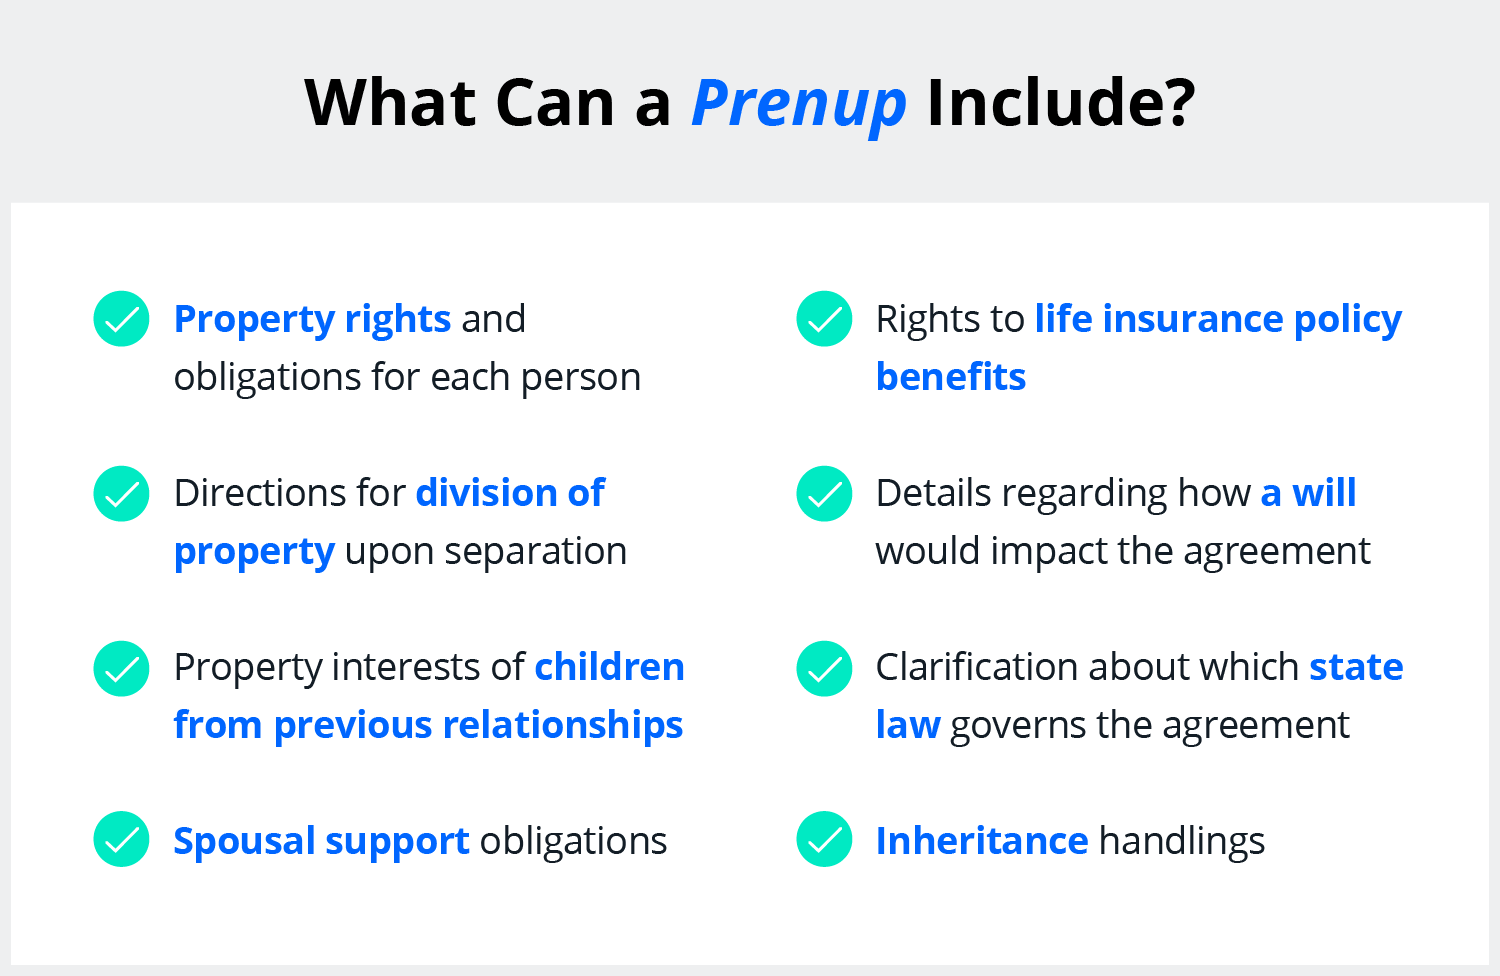  A checklist shows items what a prenup can cover, including: Property rights and obligations for each person, directions for division of property upon separation, property interests of children from previous relationships, spousal support obligations, rights to life insurance policy benefits, details regarding how a will would impact the agreement, clarifications about which state law governs the agreement, and inheritance handlings.